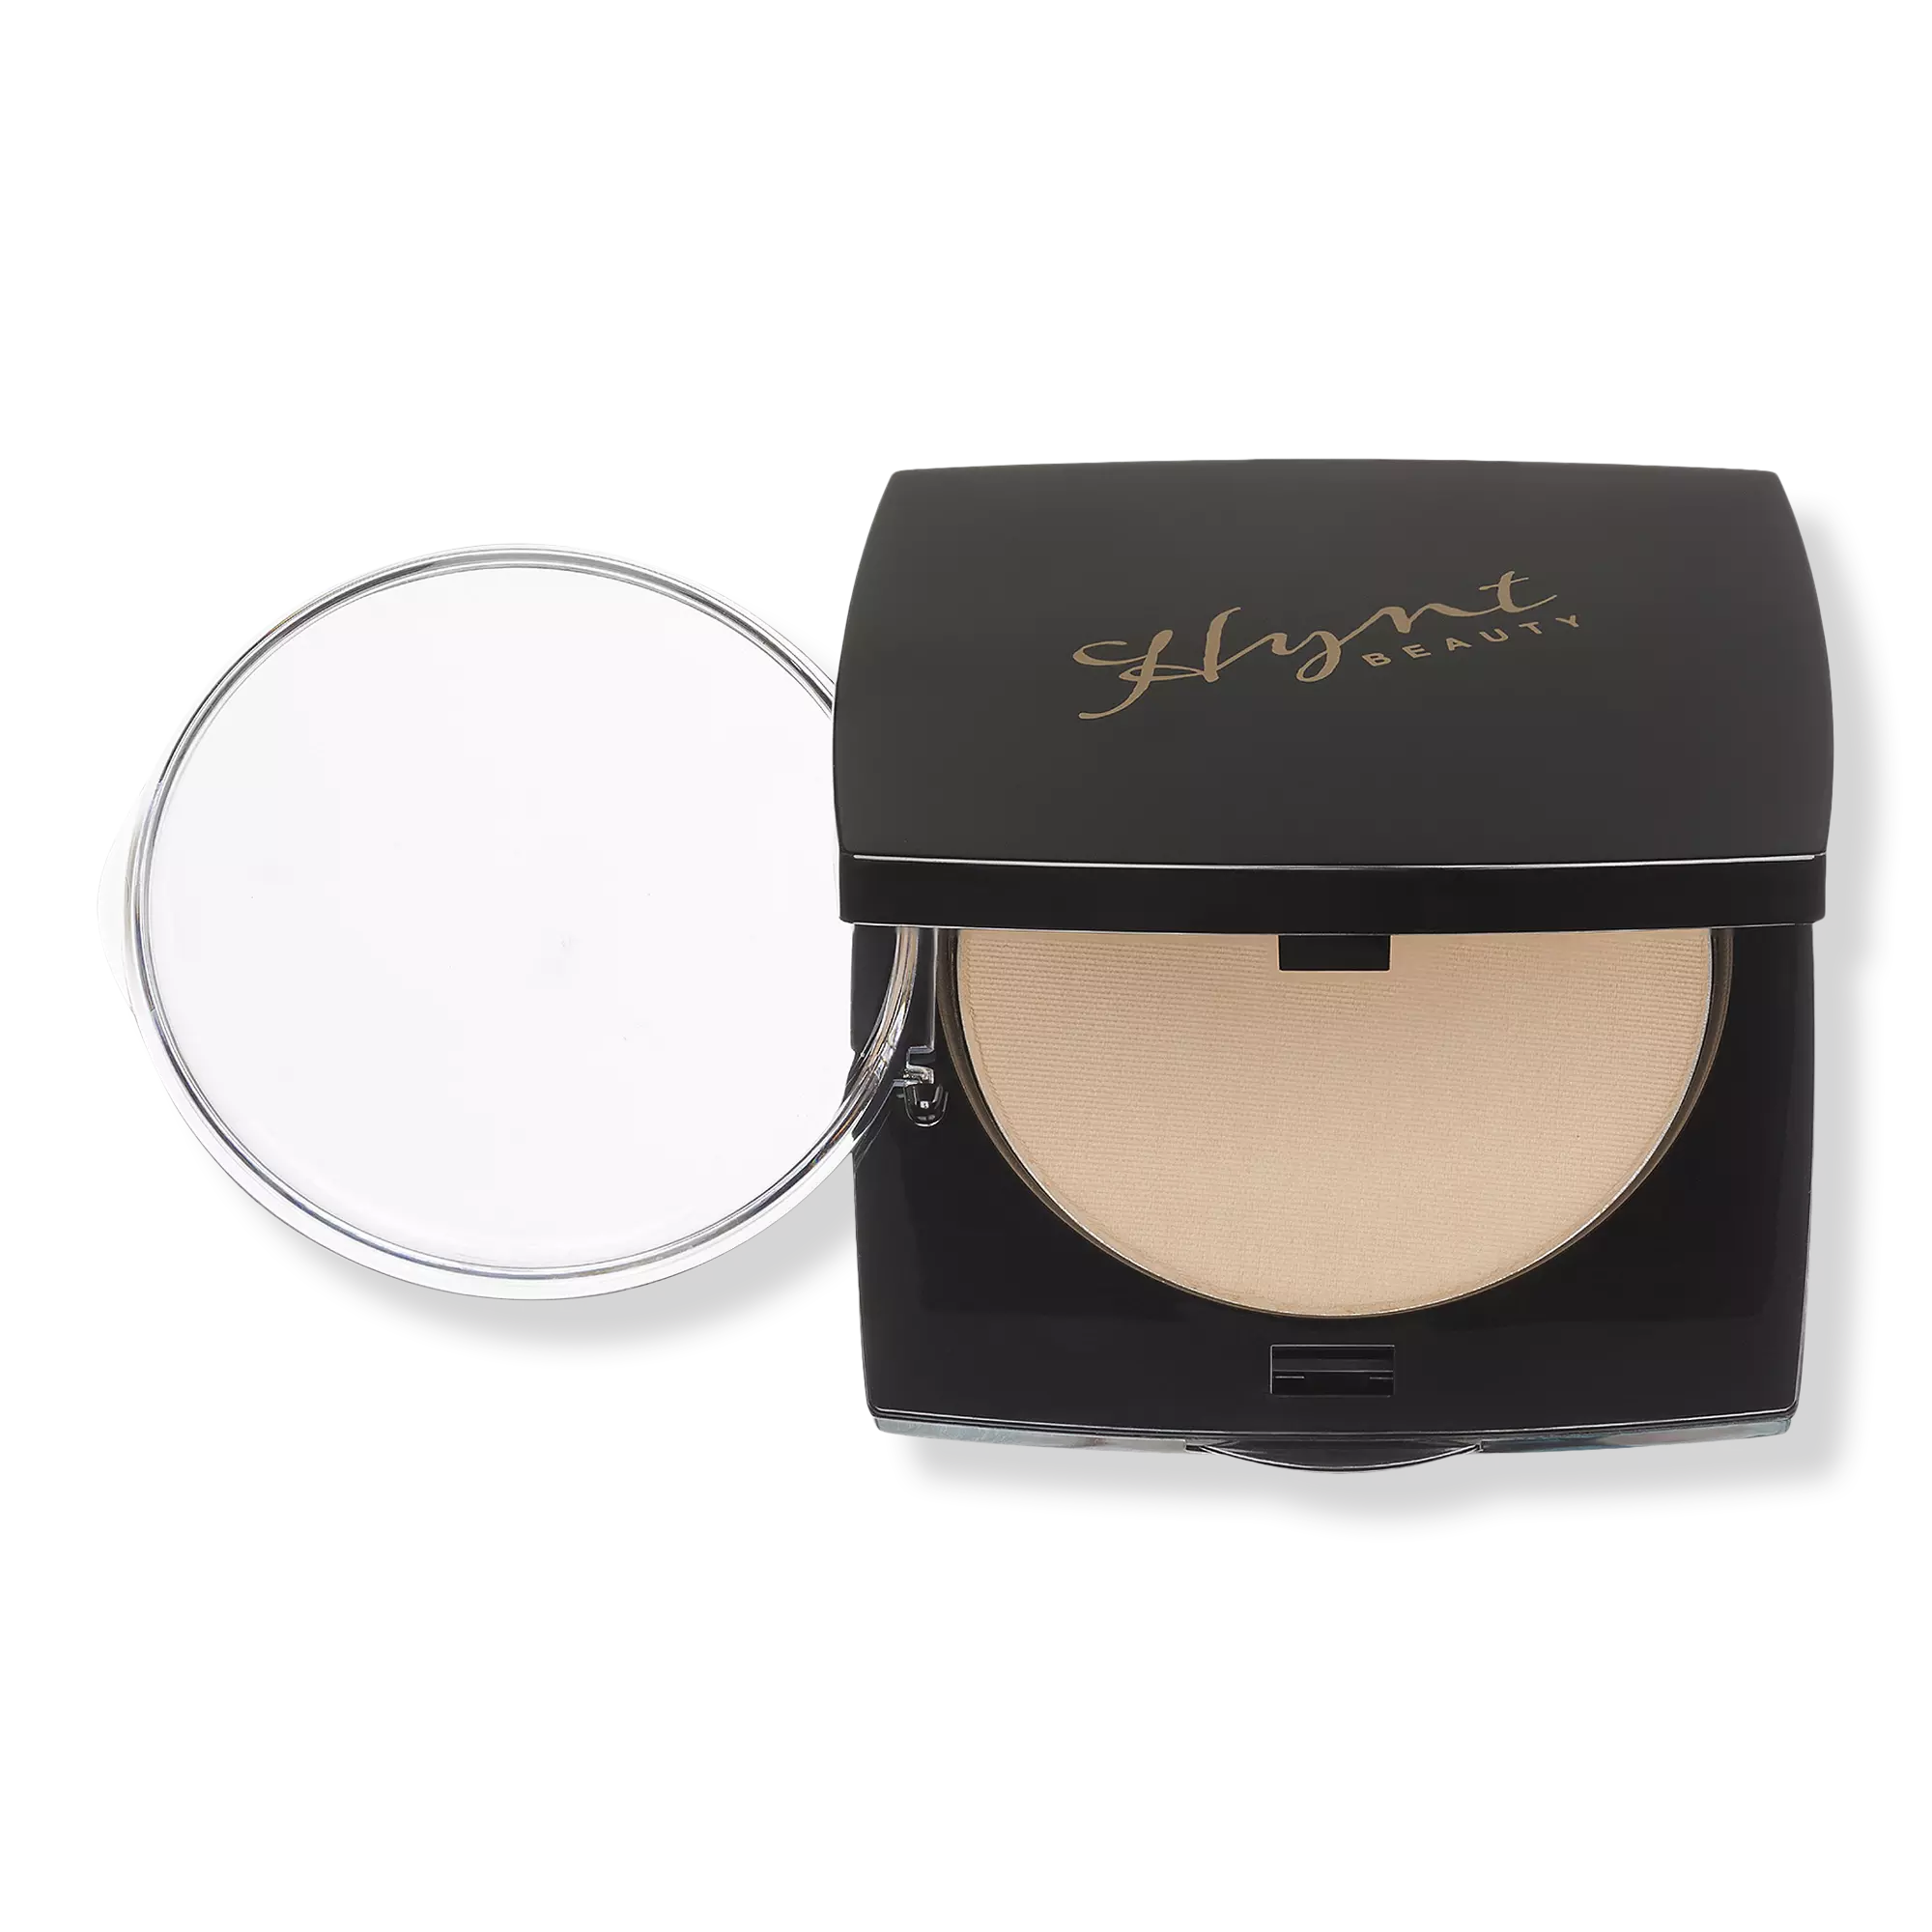 Load image into Gallery viewer, Hynt Beauty Encore Fine Pressed Powder
